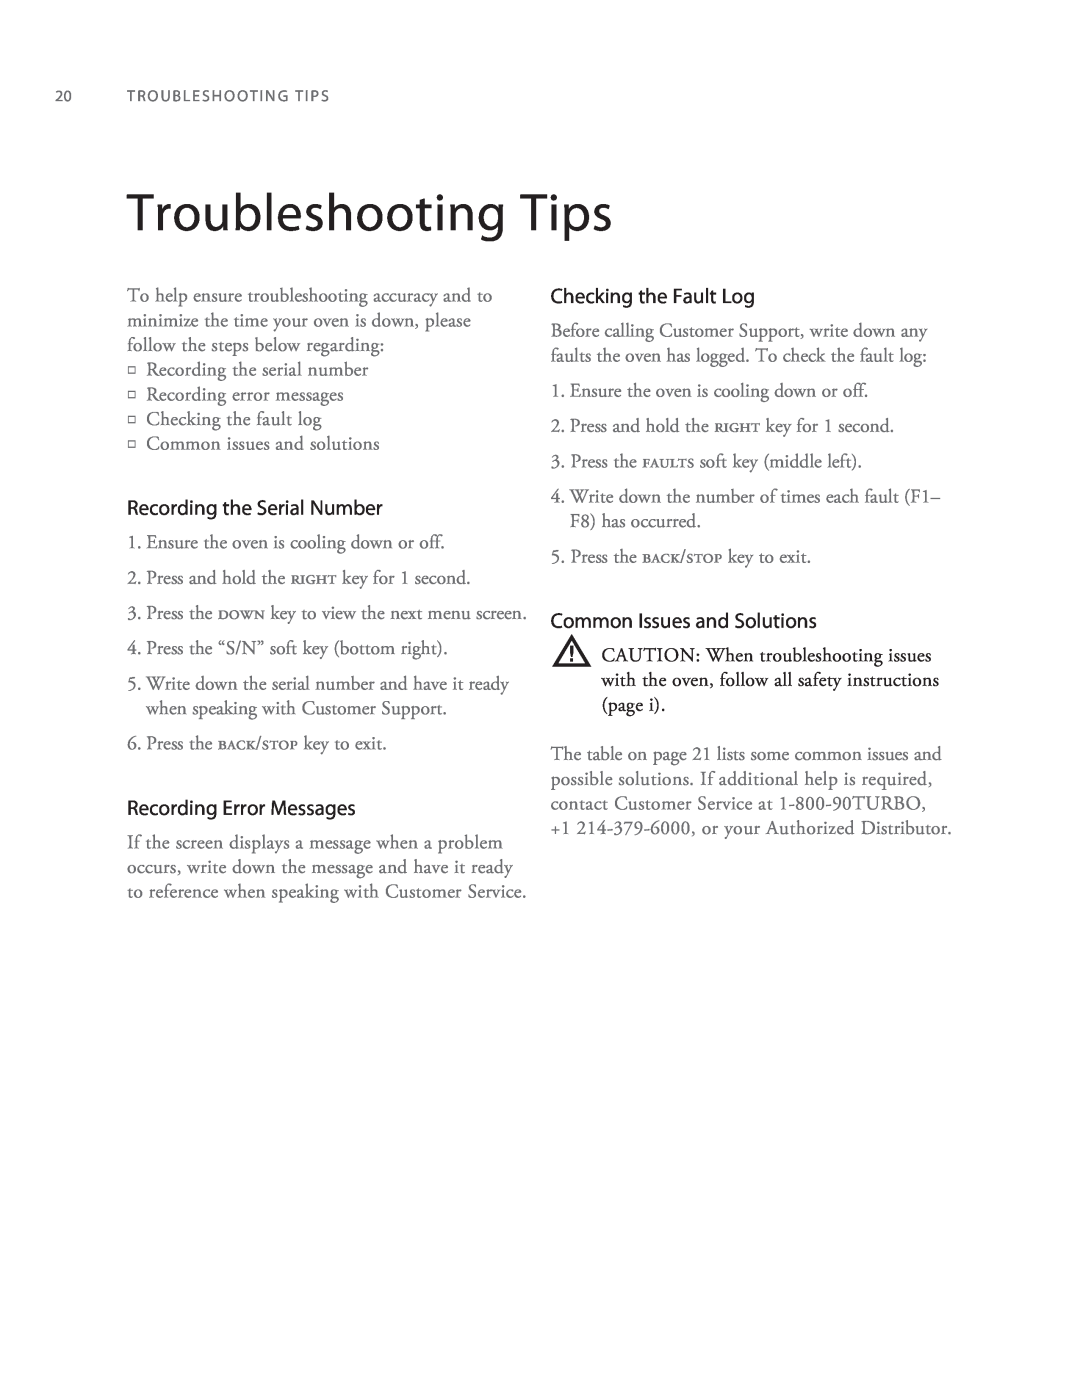 Turbo Chef Technologies 2TM manual Troubleshooting Tips, Recording the Serial Number, Recording Error Messages 